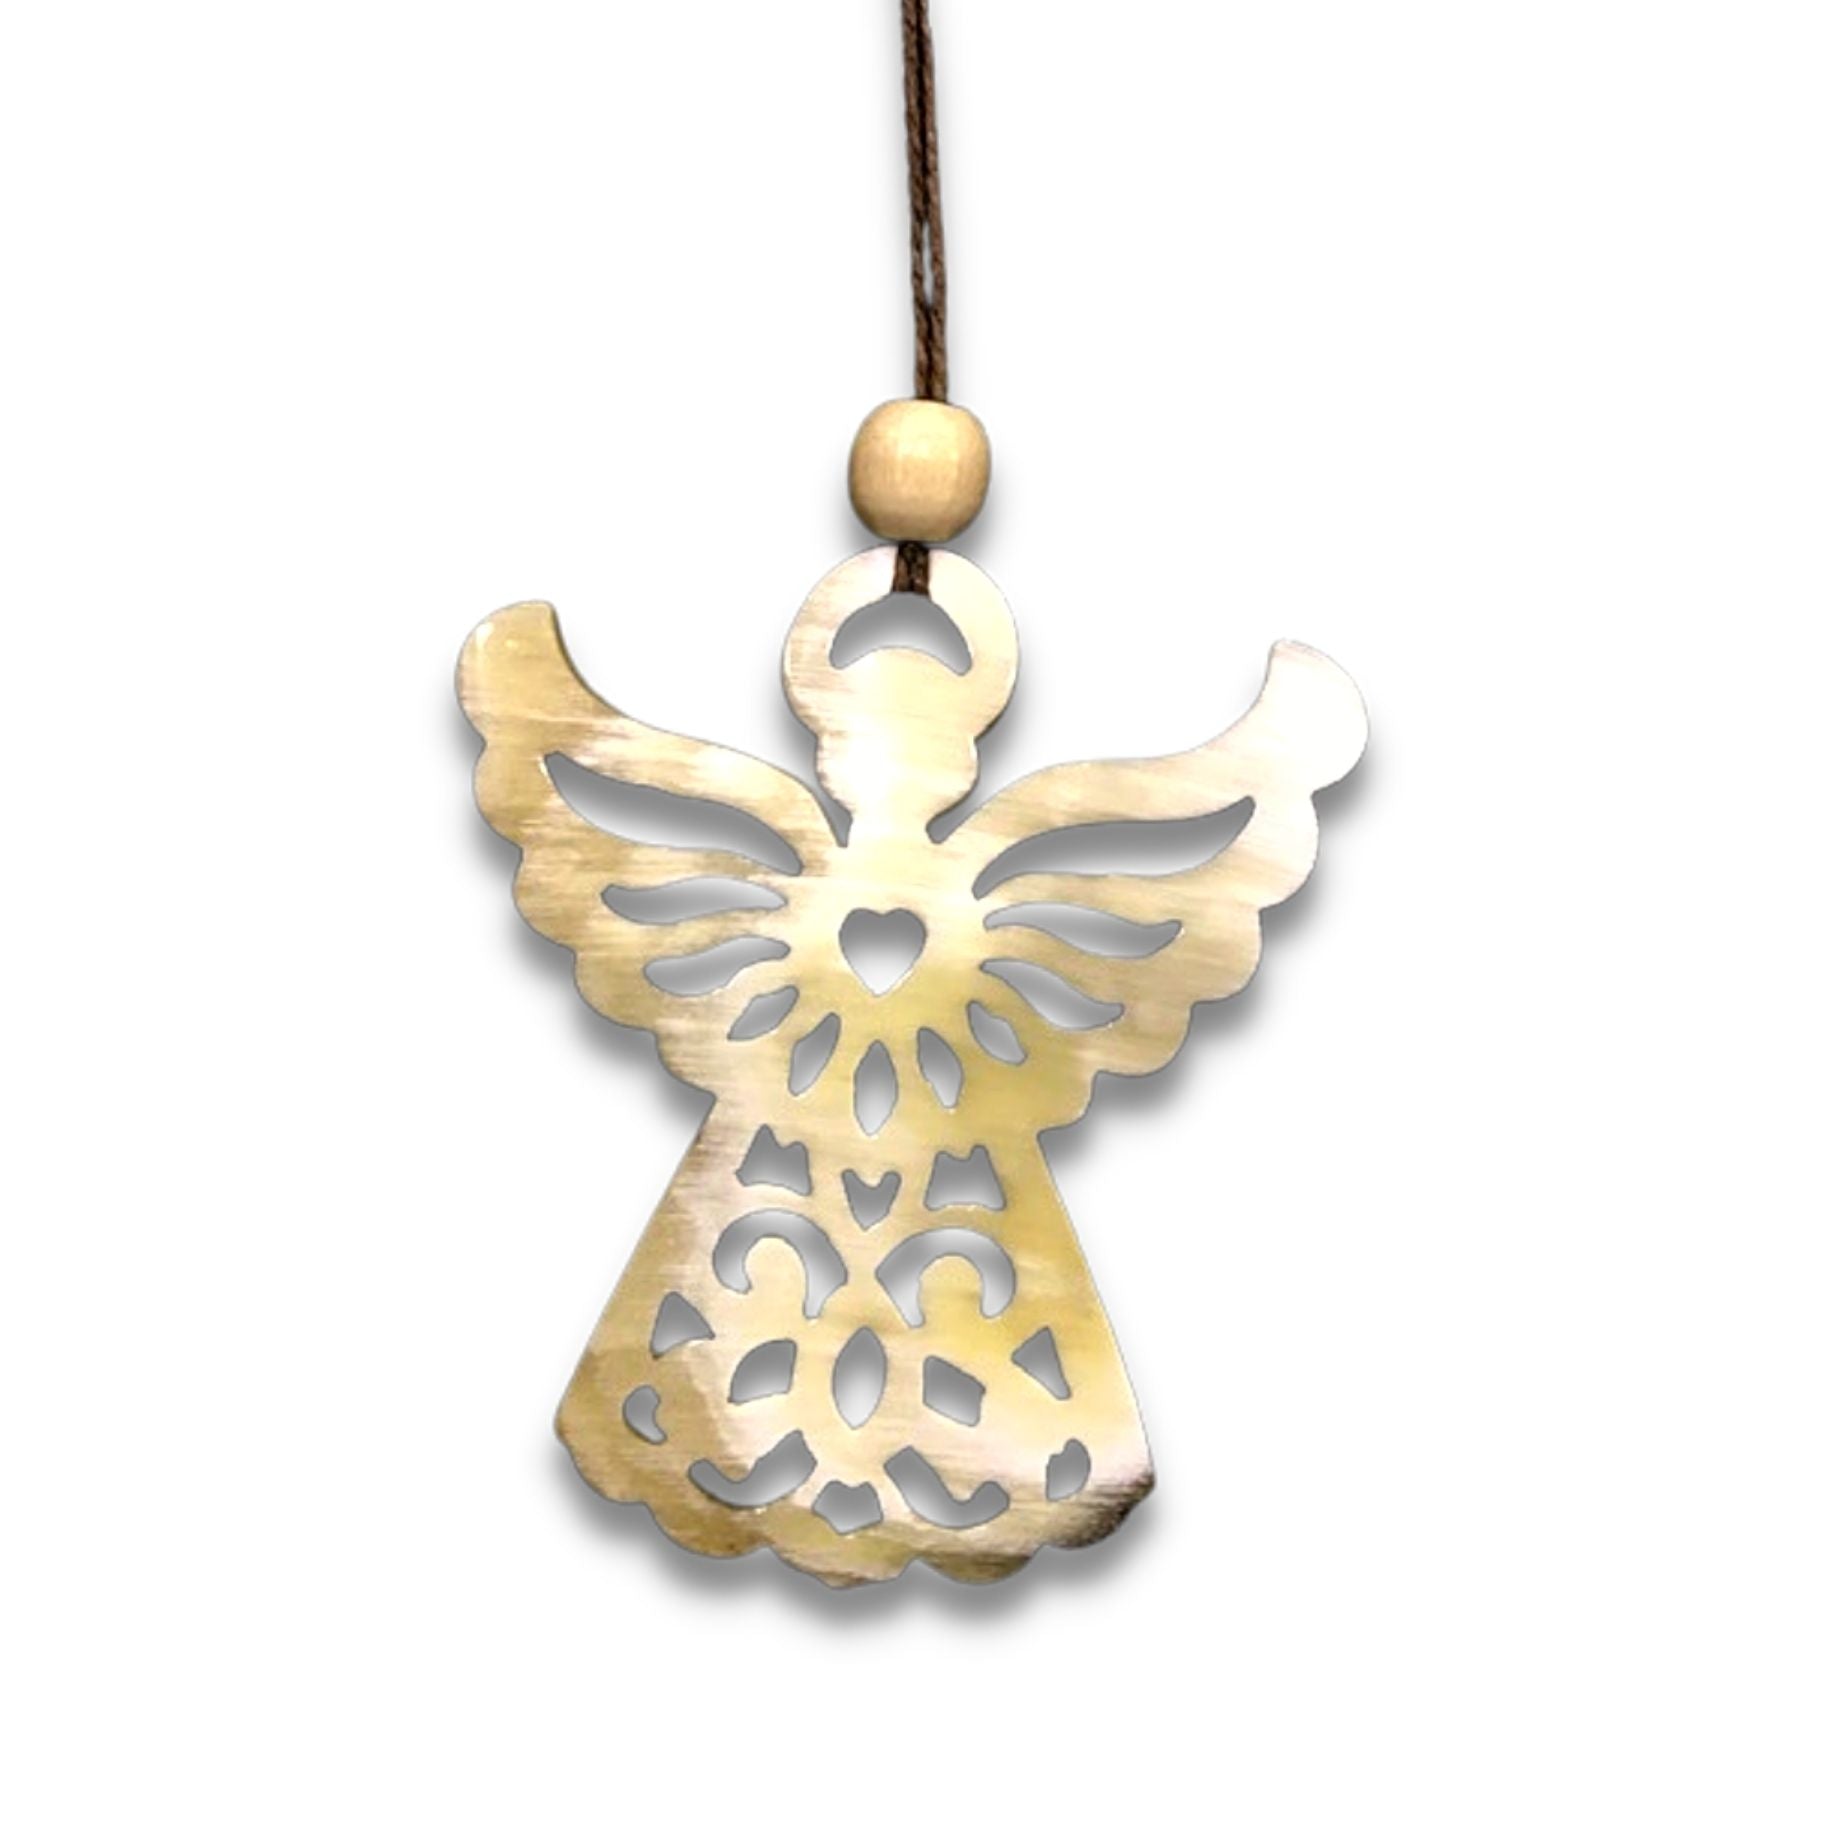 Recycled Angel Ornament